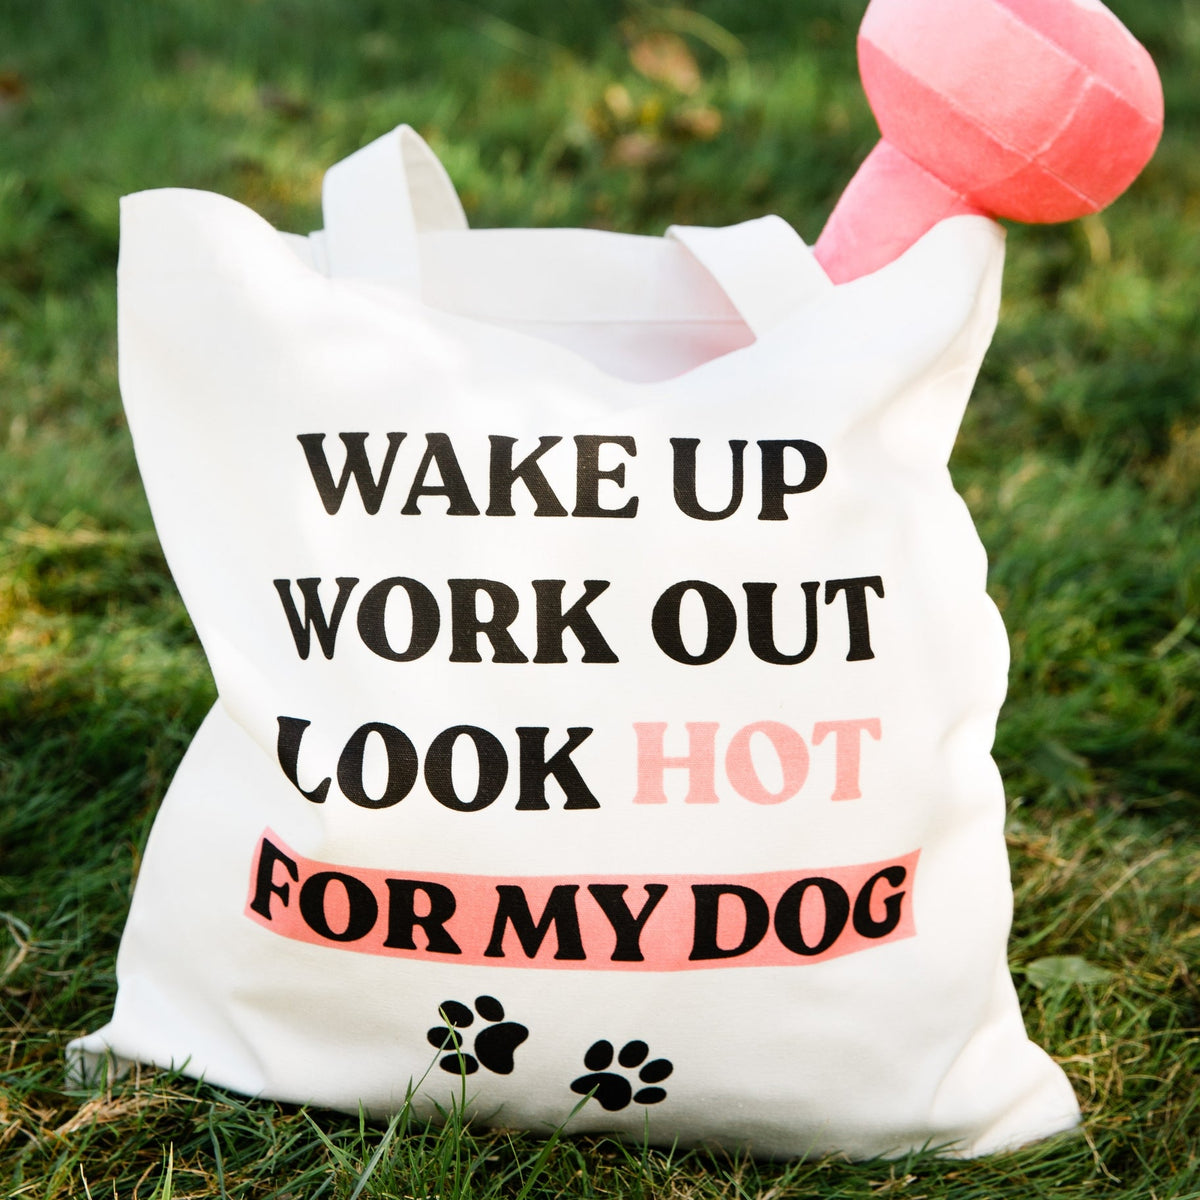 Workout Dog Toy and Tote Bag Set